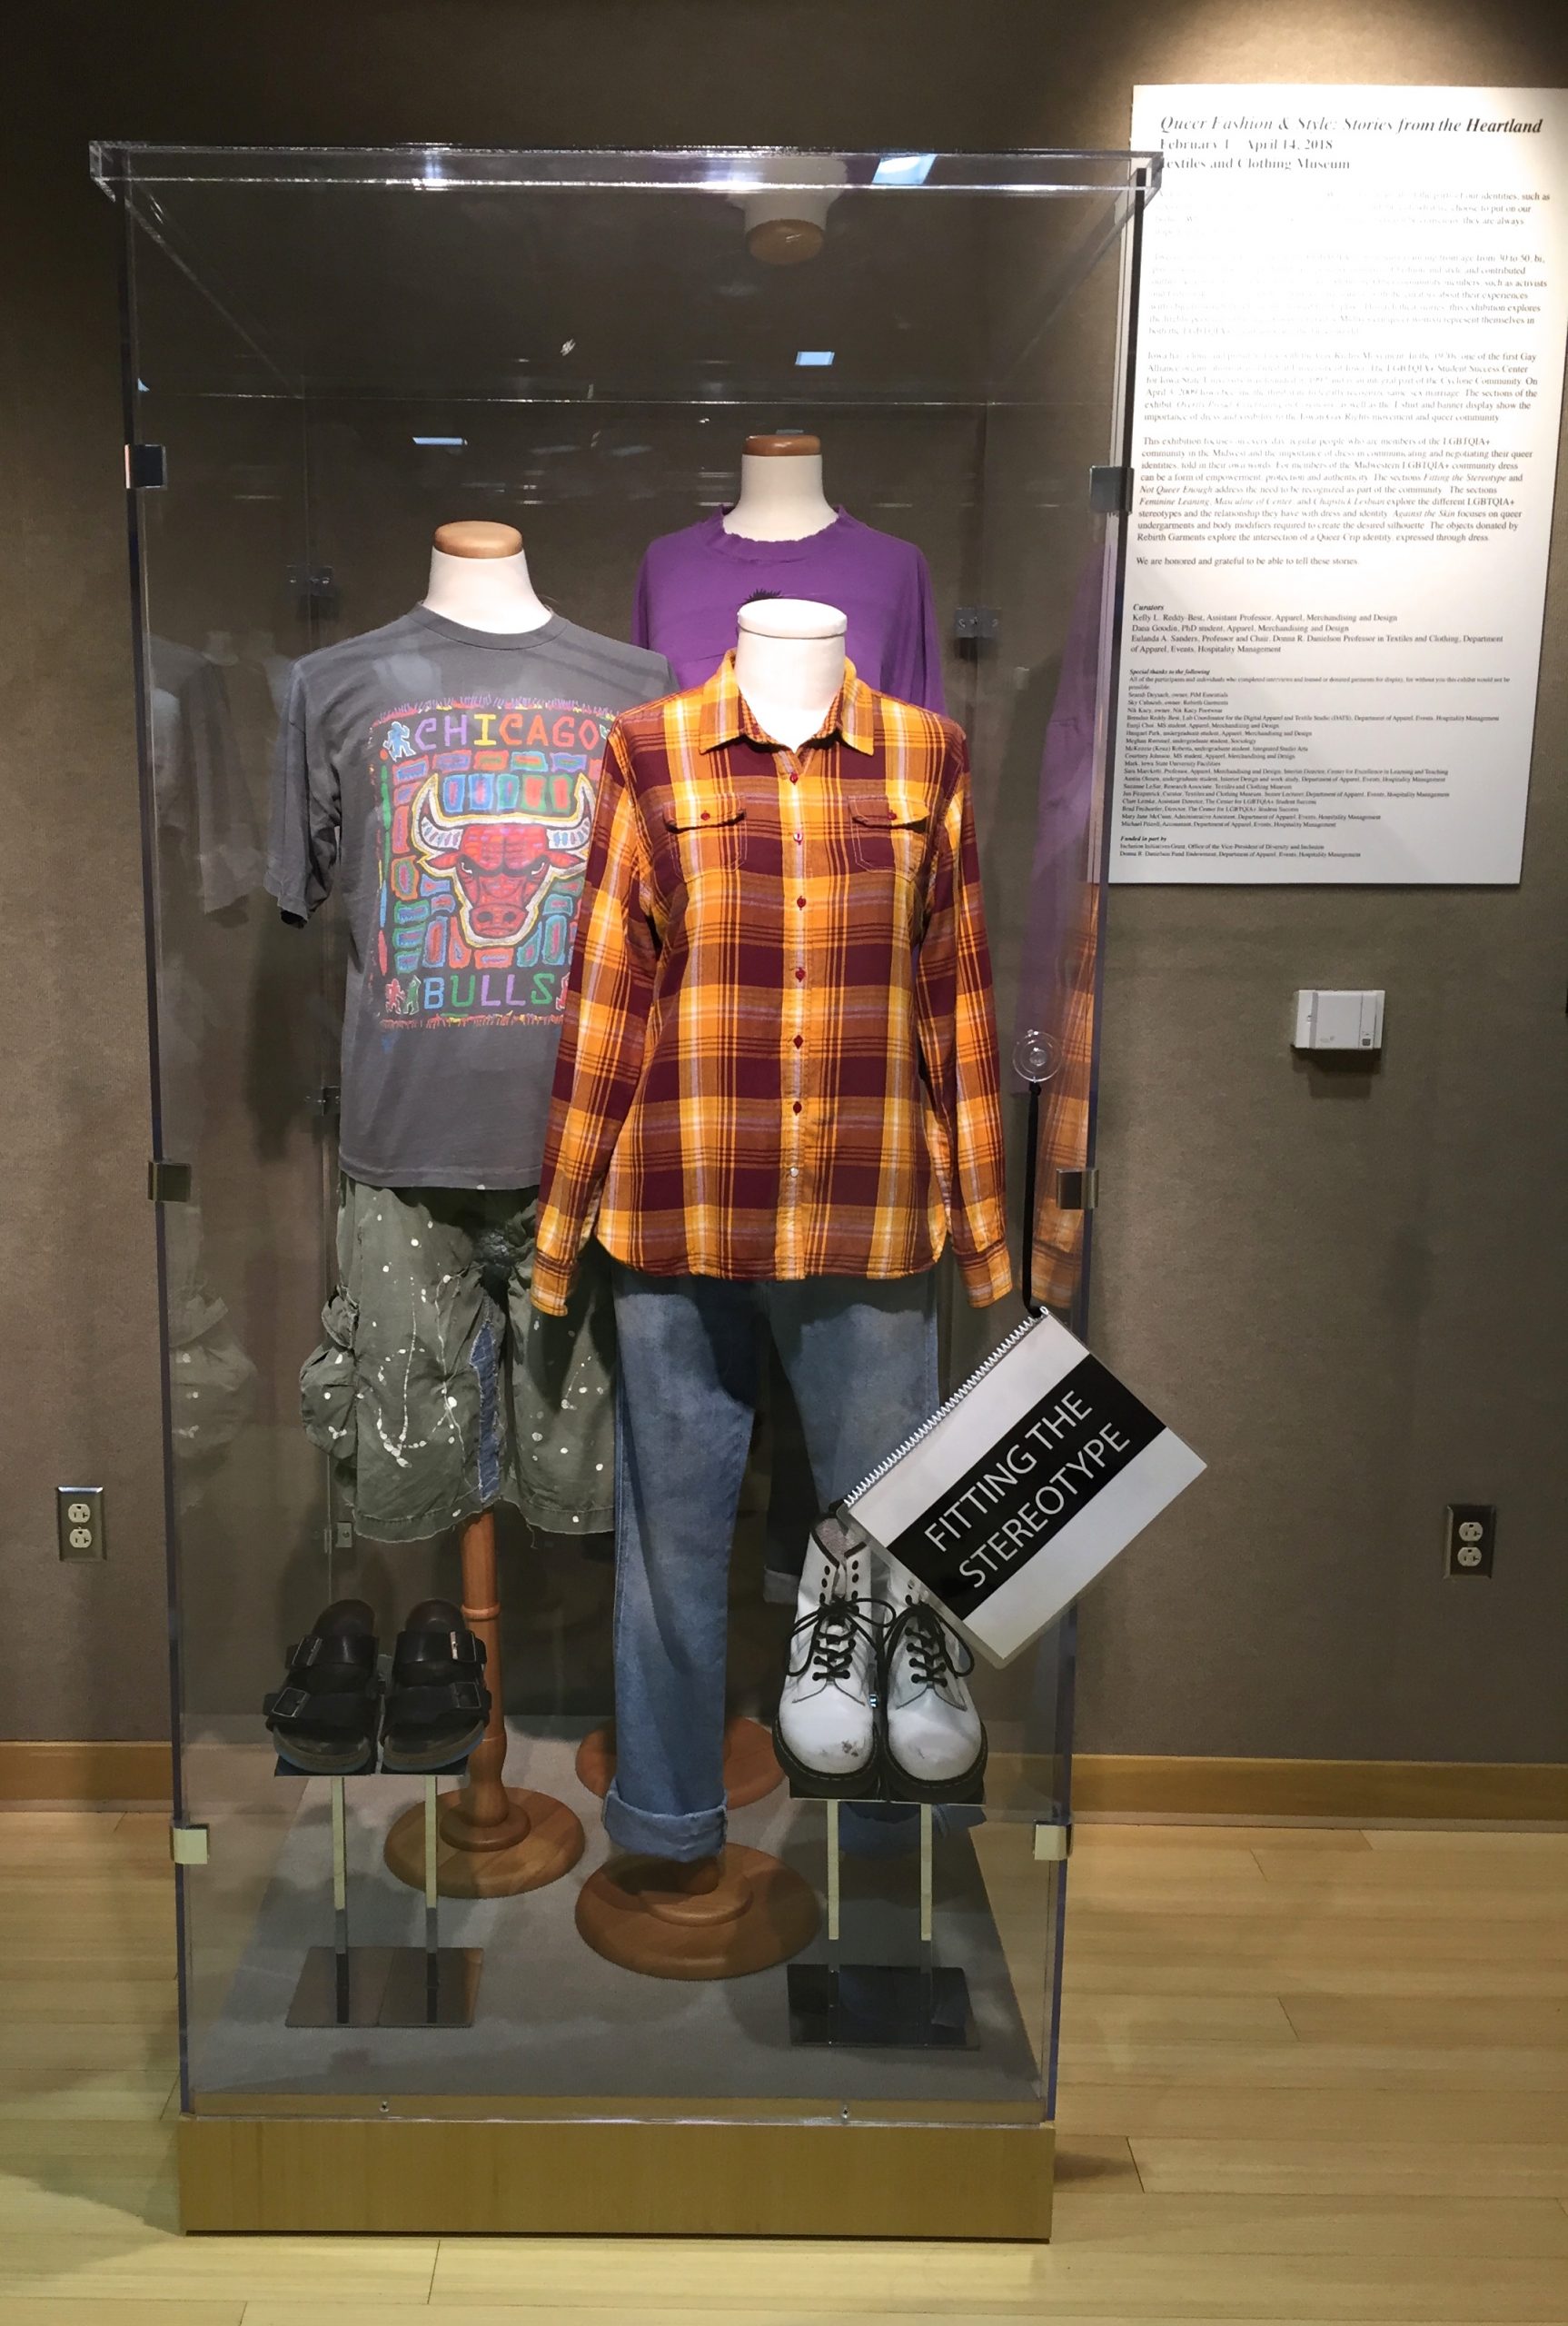 Glass case featuring dress forms wearing outfits from "Fitting the Stereotype".